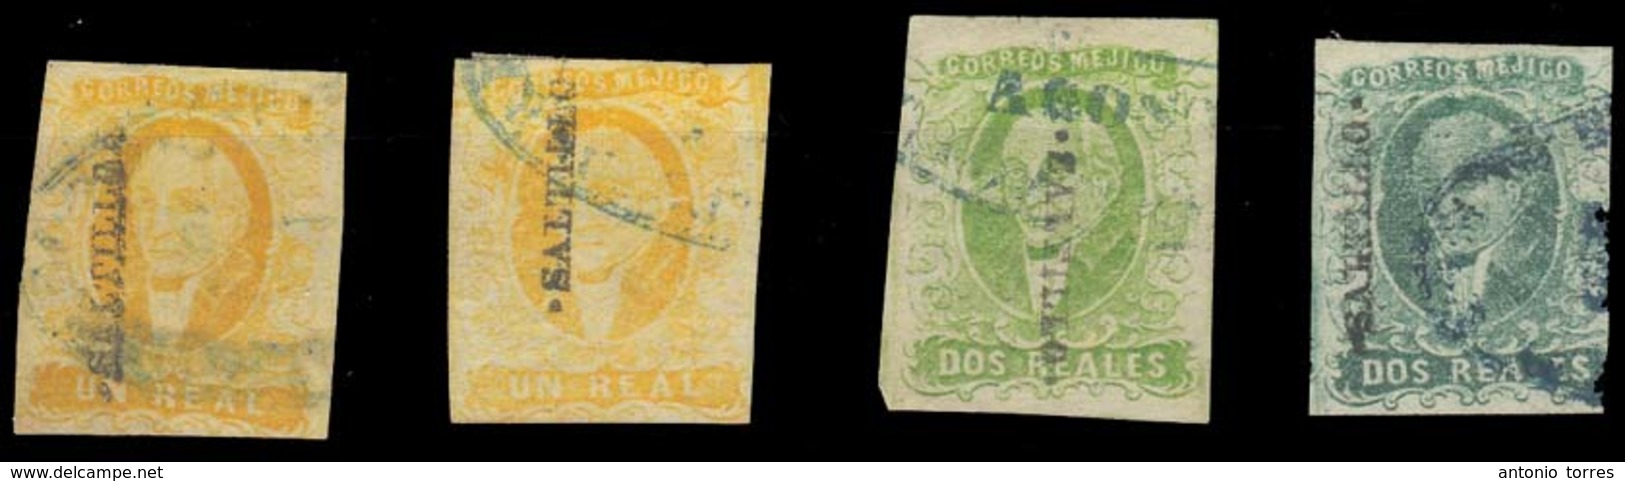 MEXICO. Sc 2º/3ºa. SALTILLO District. 1rl Yellow (2 Shades) And 2rs Green Yellow And Blue Green (rare), All Oval Blue Ca - Mexico